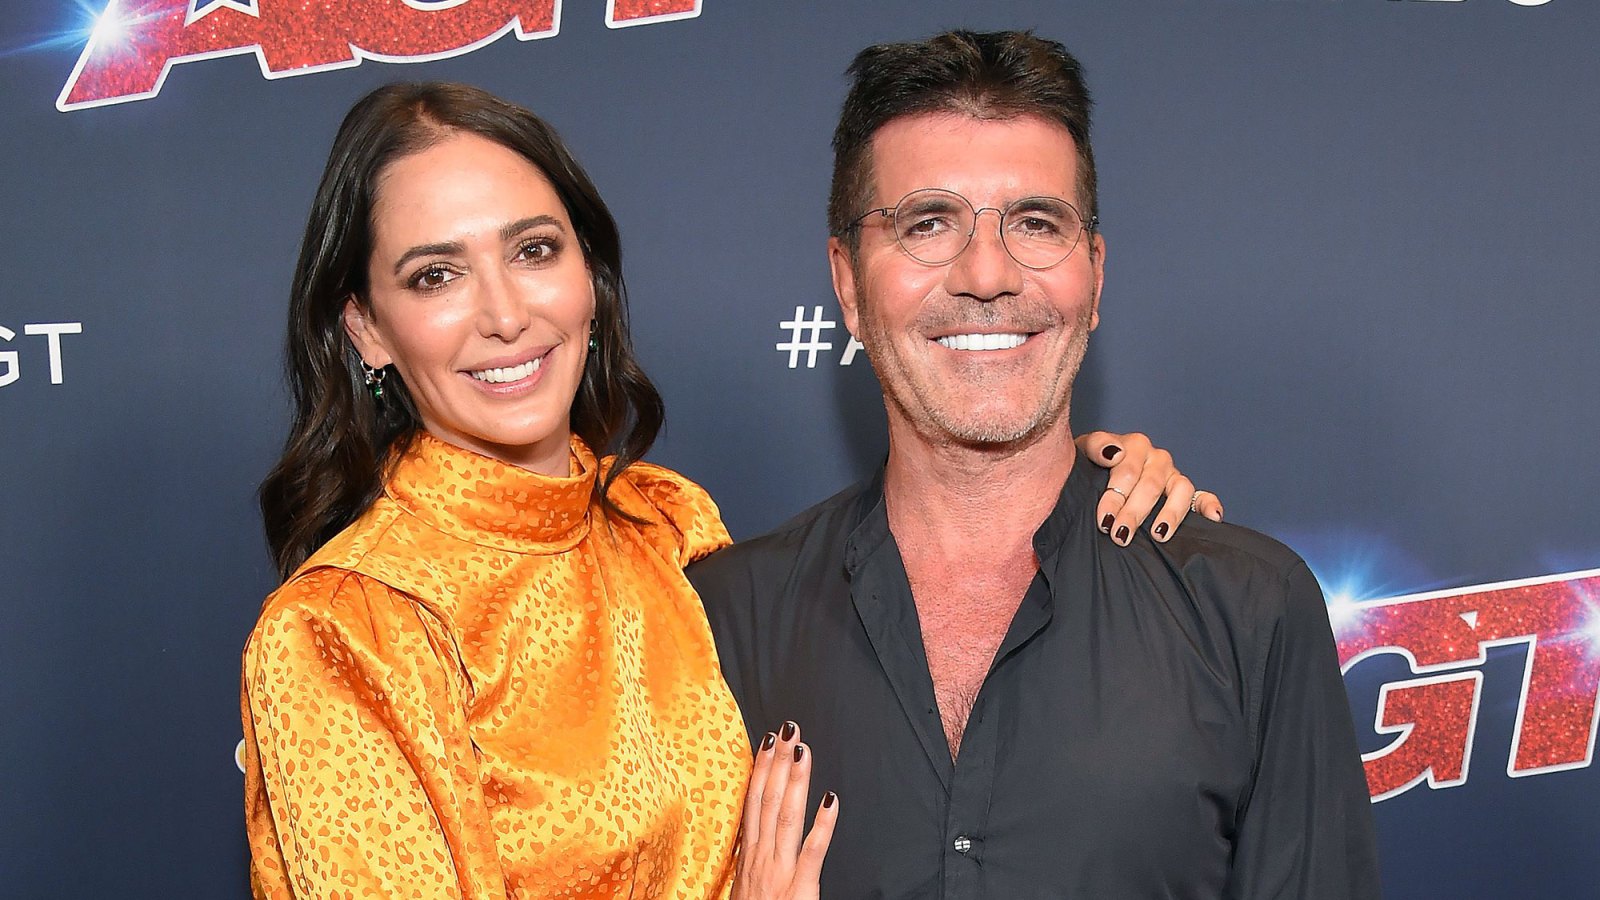 Simon Cowell Is Engaged To Lauren Silverman After More Than 10 Years Us Weekly 